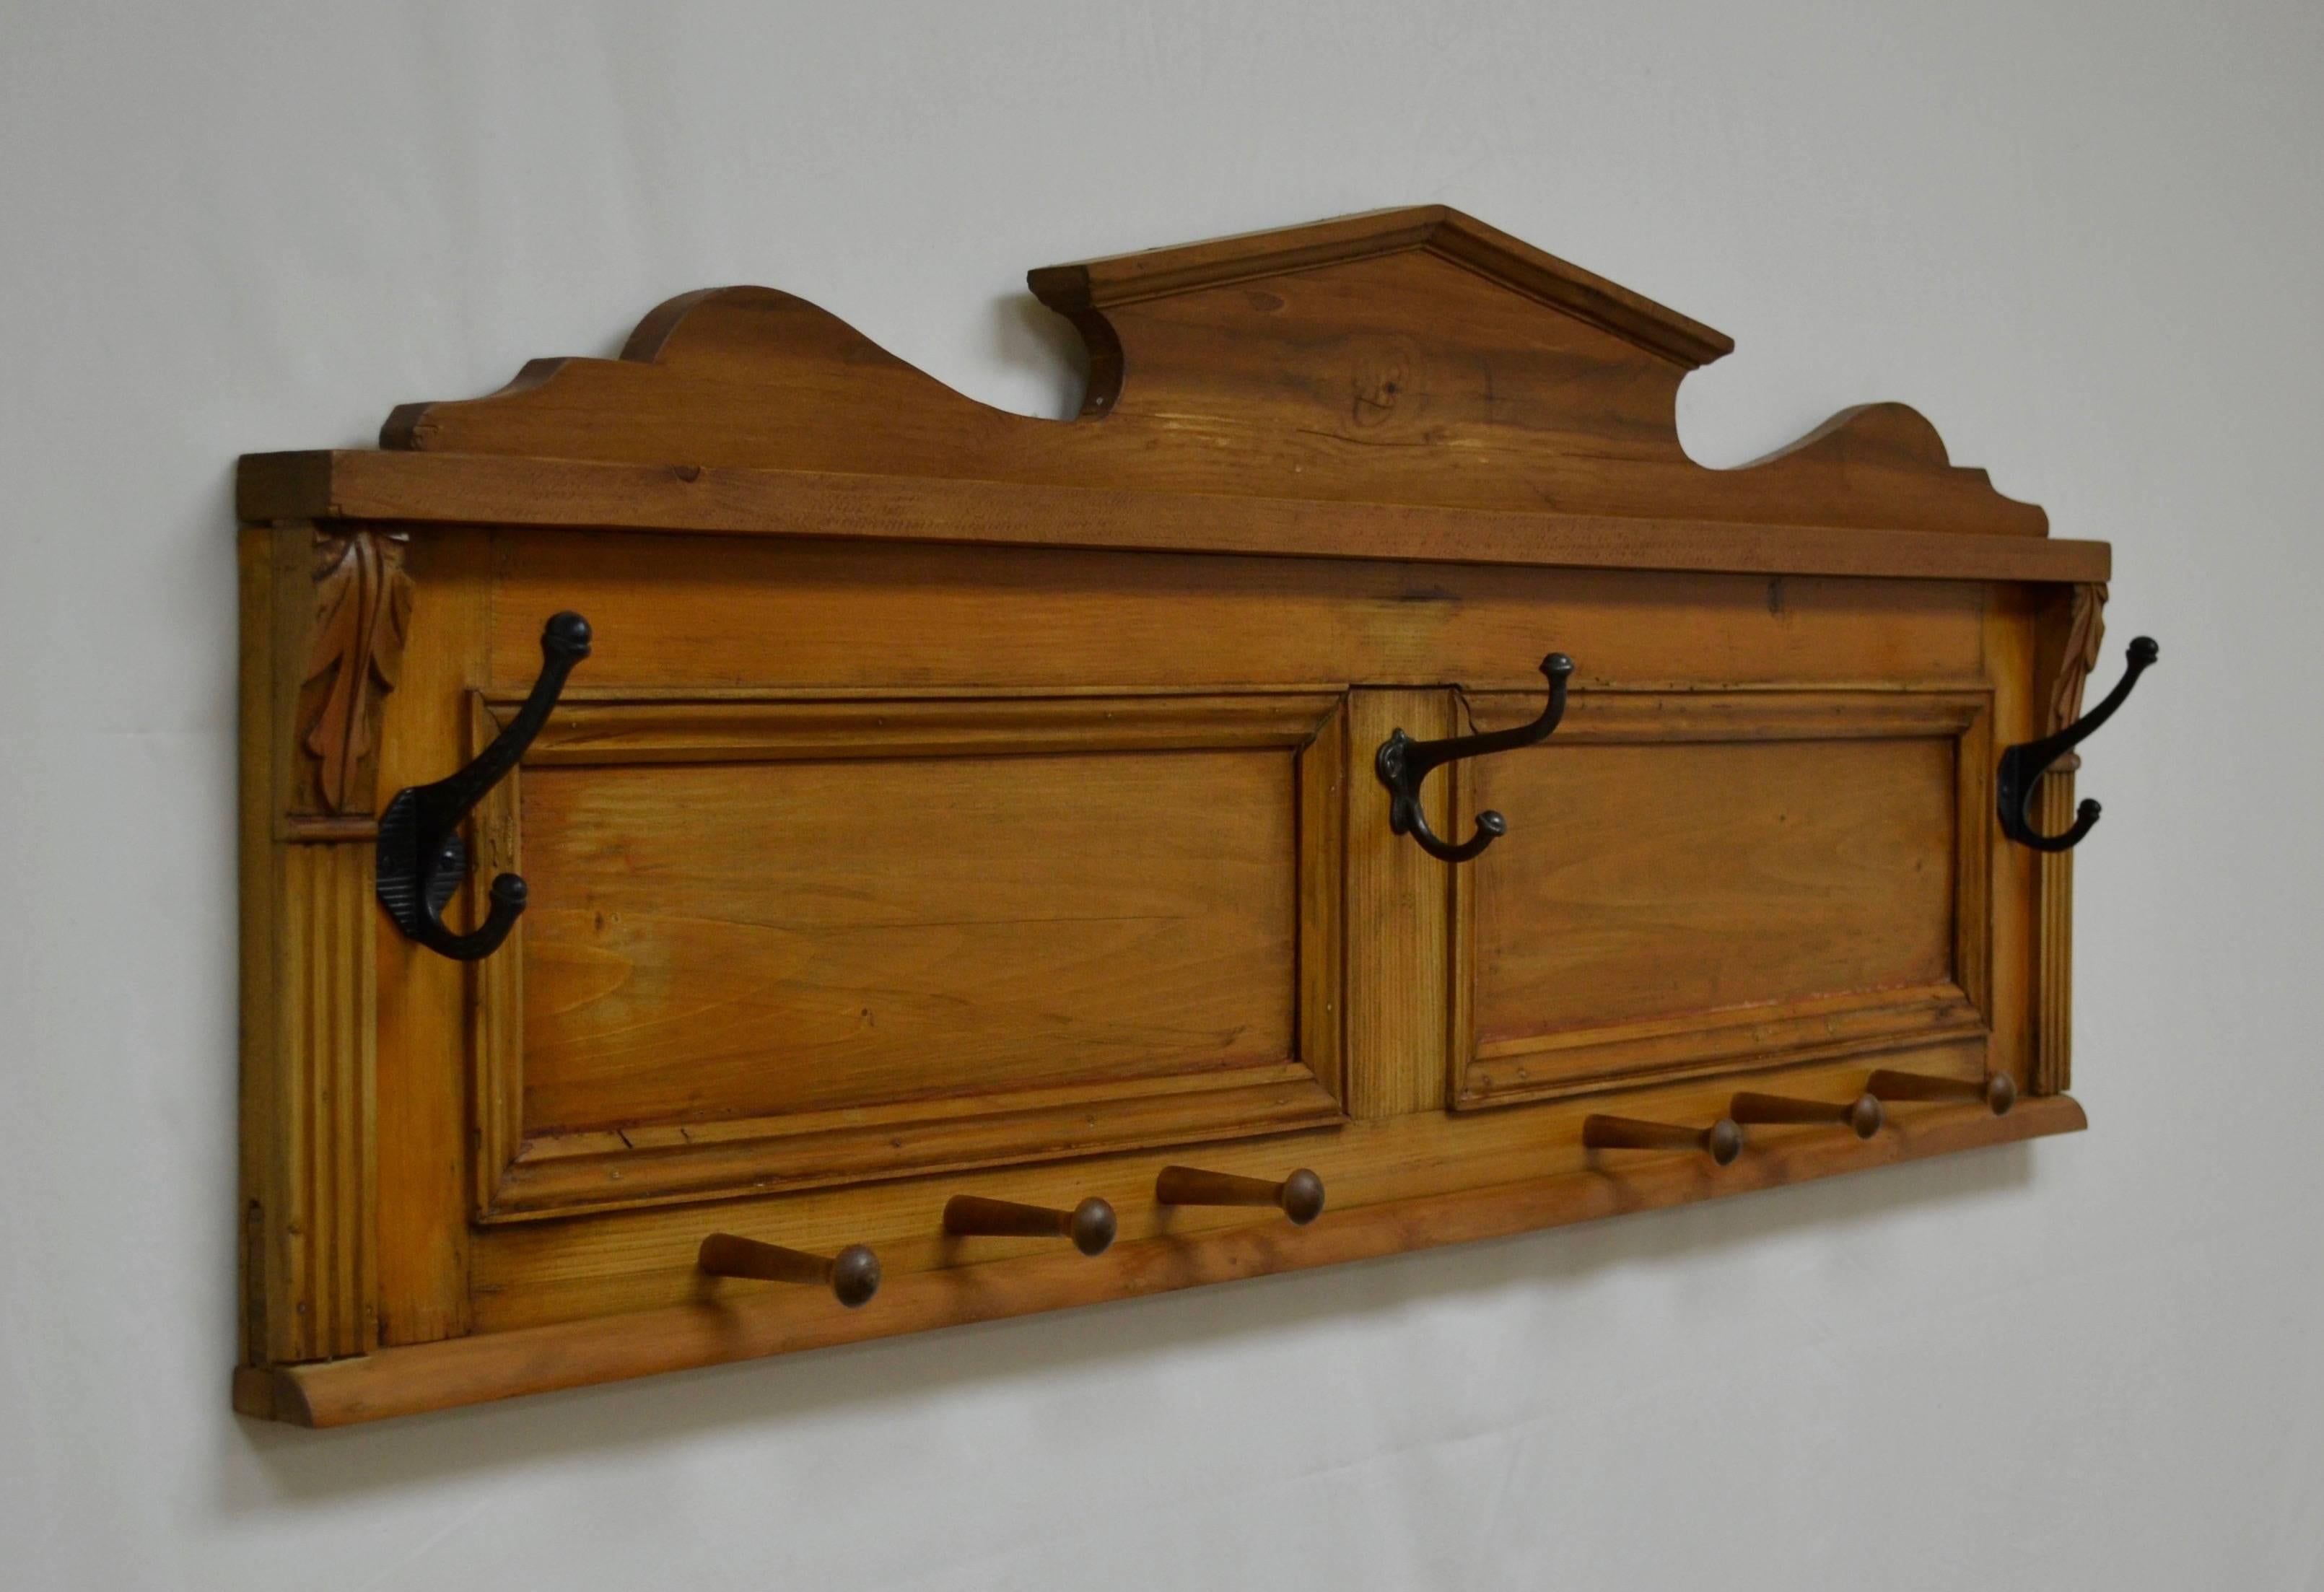 In a creative case of re-purposing, an orphan two paneled backboard from an antique pine buffet, complete with its original fluting and hand-carved acanthus leaf corbels, has been mounted with the abandoned crest from an antique pine armoire. The